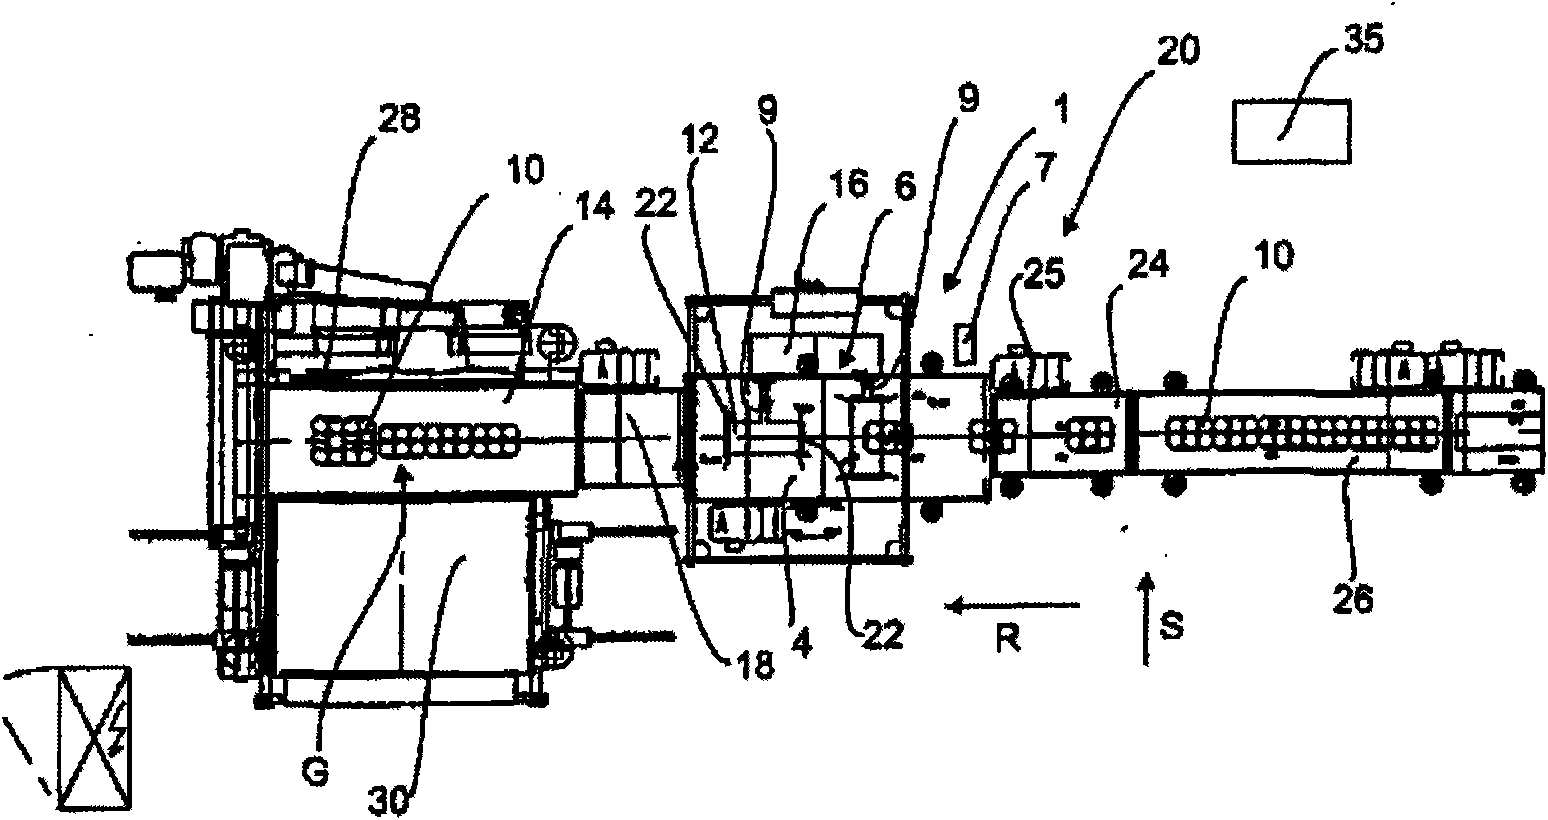 Apparatus for conveying packages